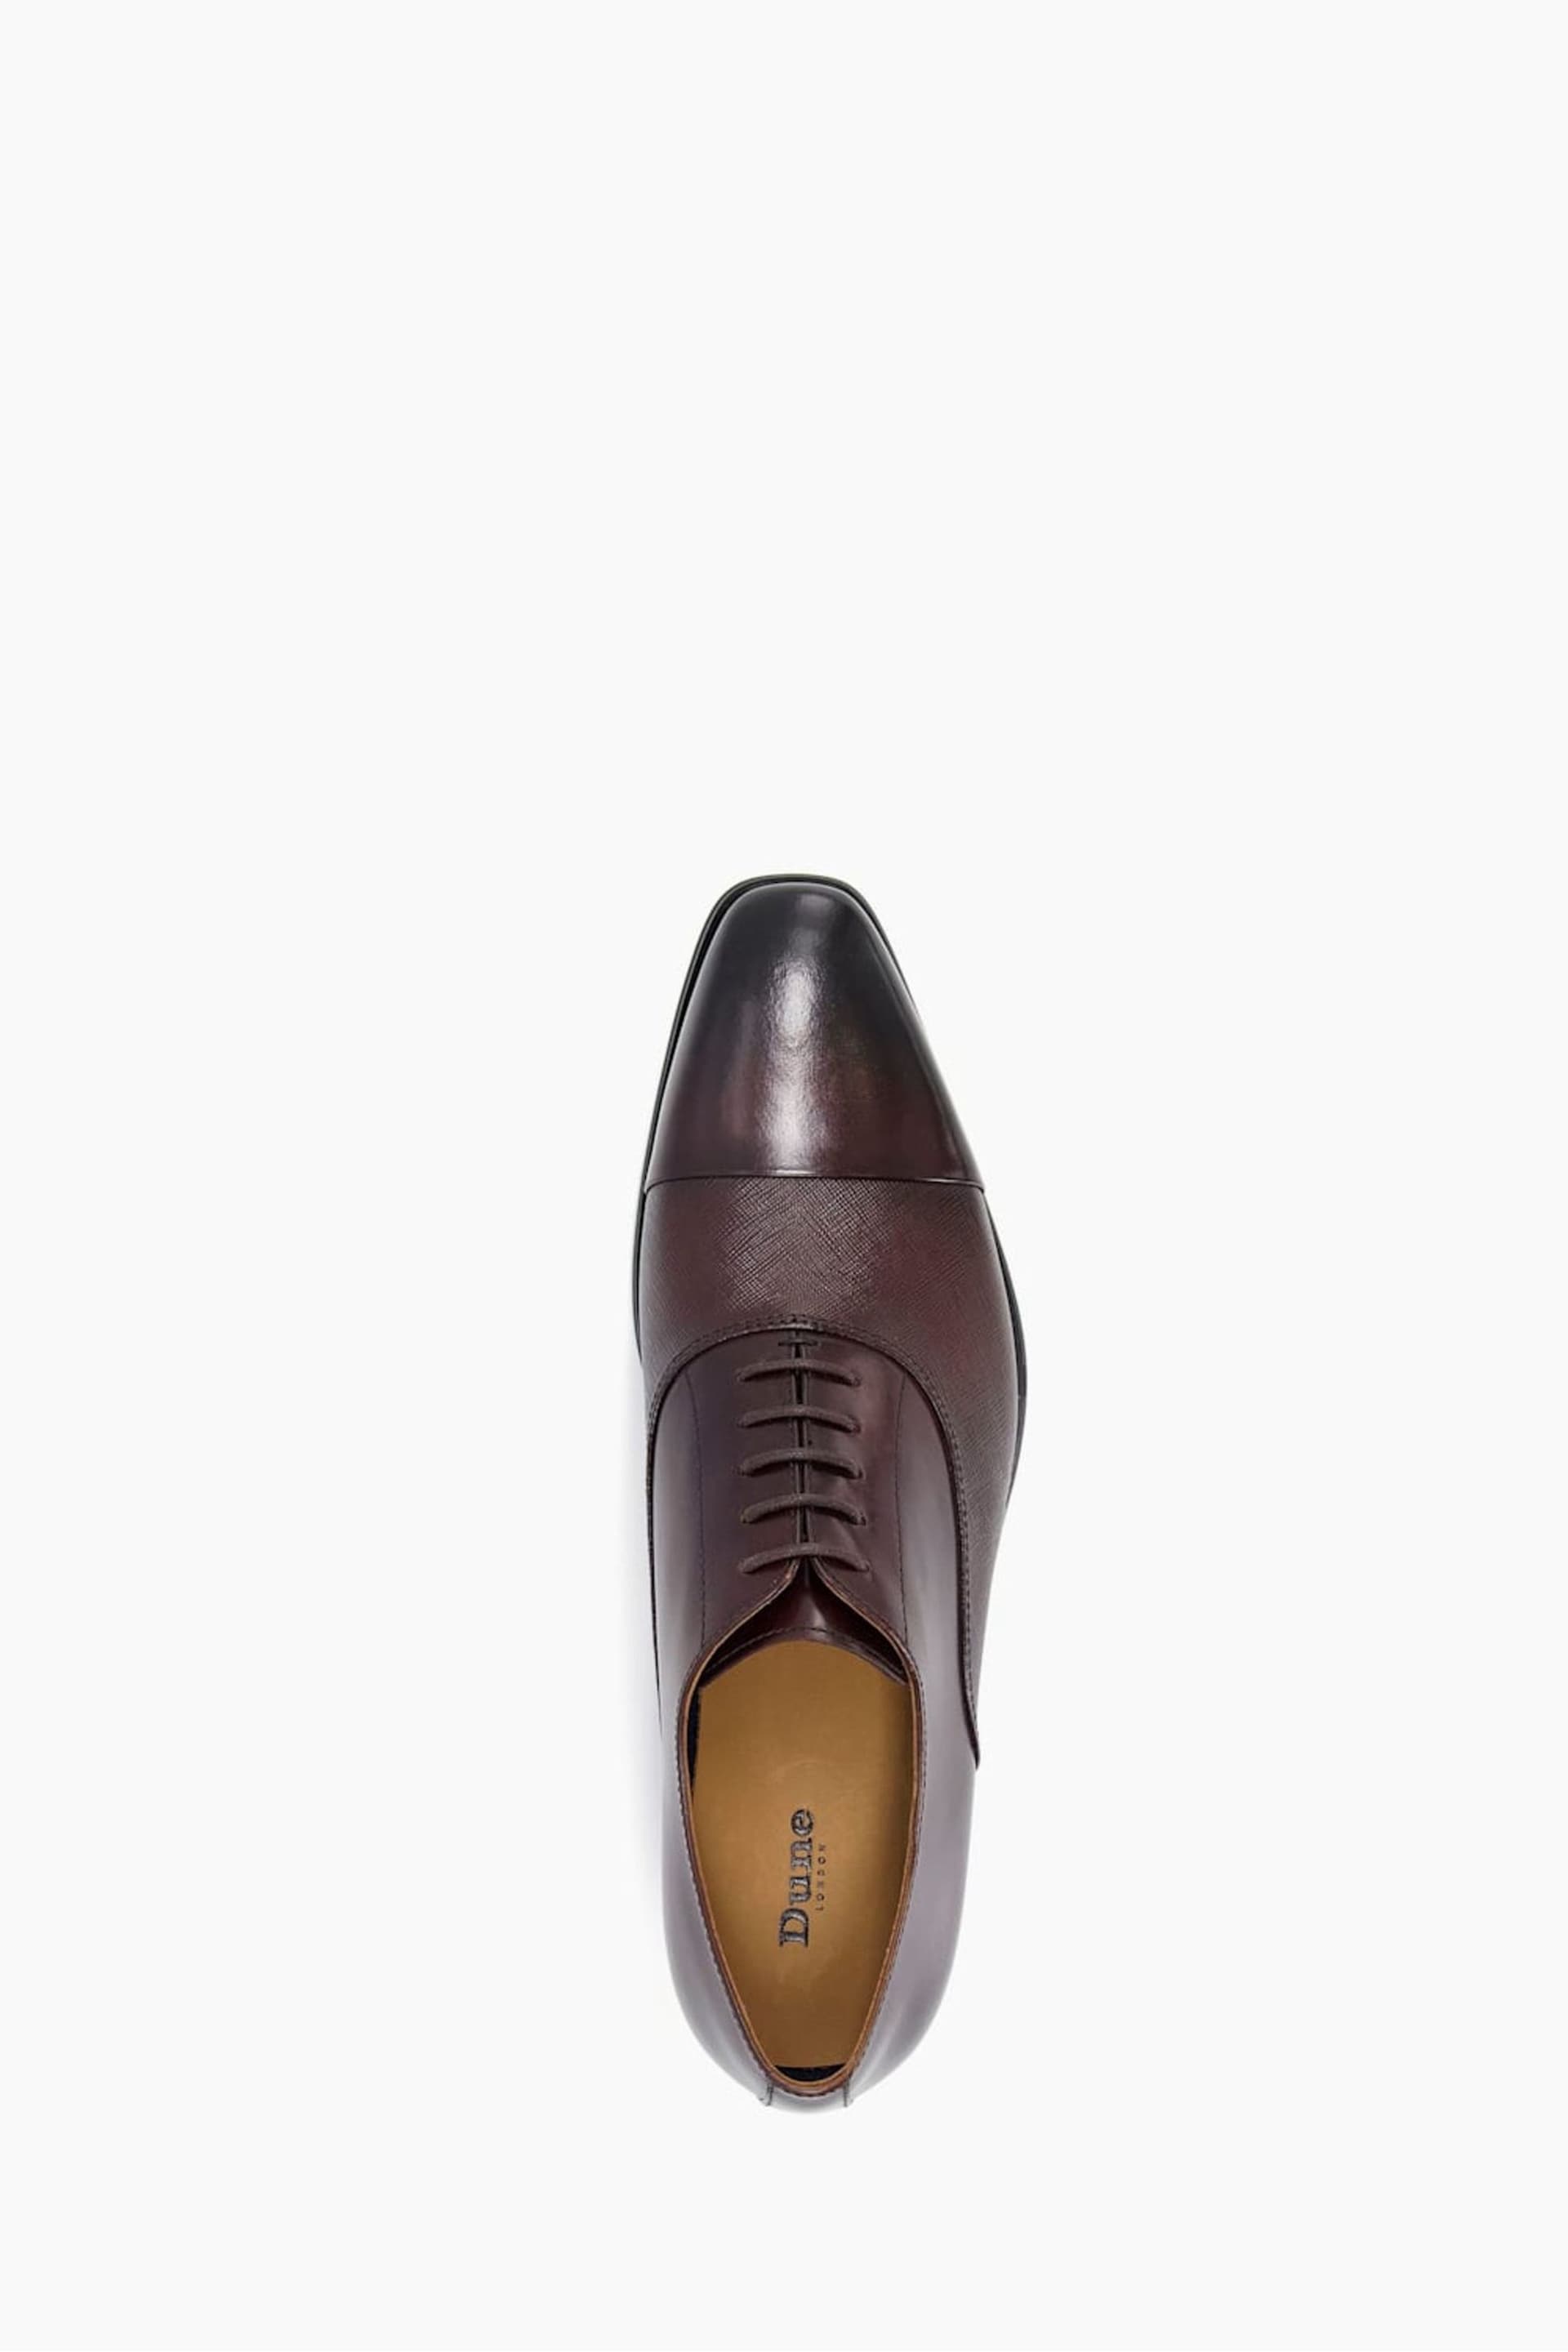 Dune London Brown Sheet Saffiano Embossed Oxford Shoes - Image 4 of 5